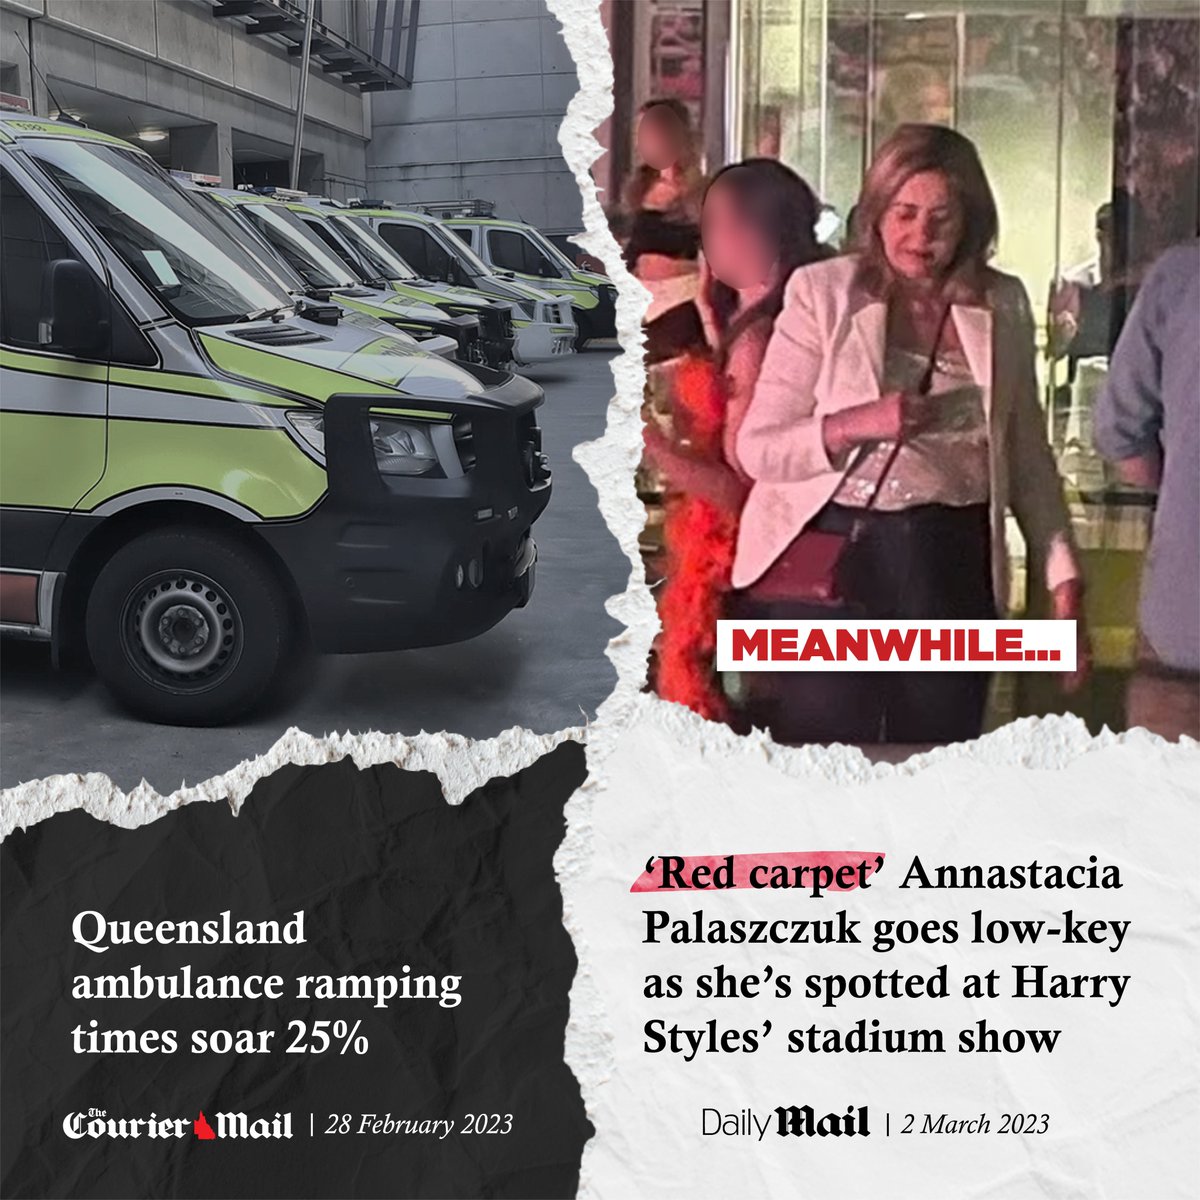 LNP – Liberal National Party: Premier Palaszczuk parties while ambulance ramping moves in one d…